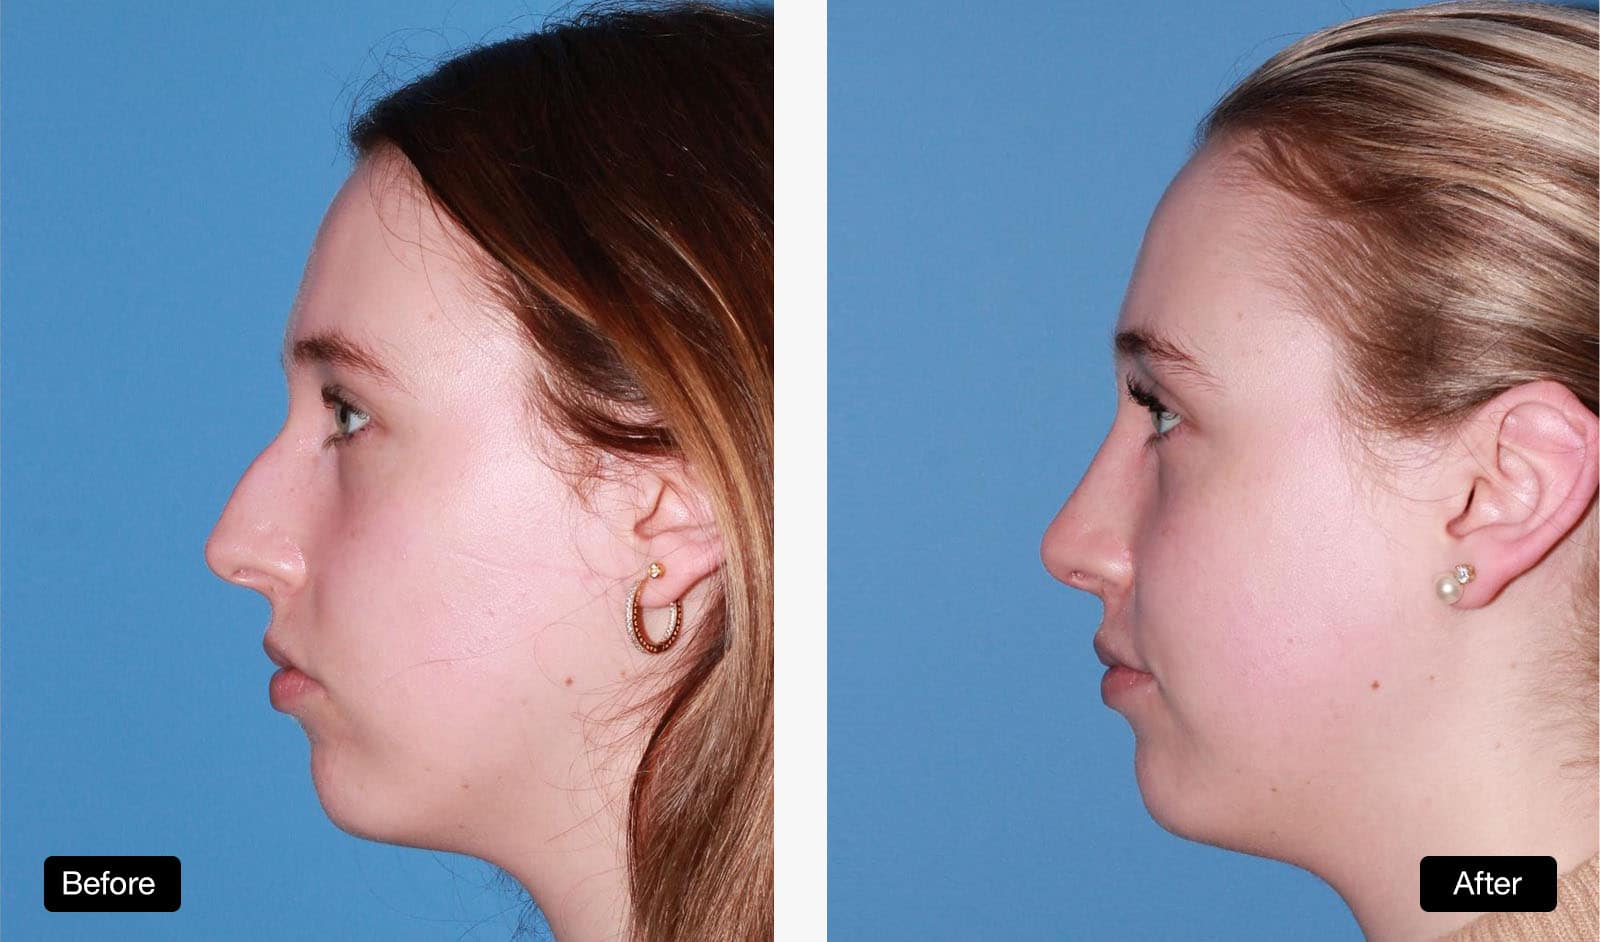 Rhinoplasty - Patient Before and After: 23 year old patient with dorsal reduction and tip refinement